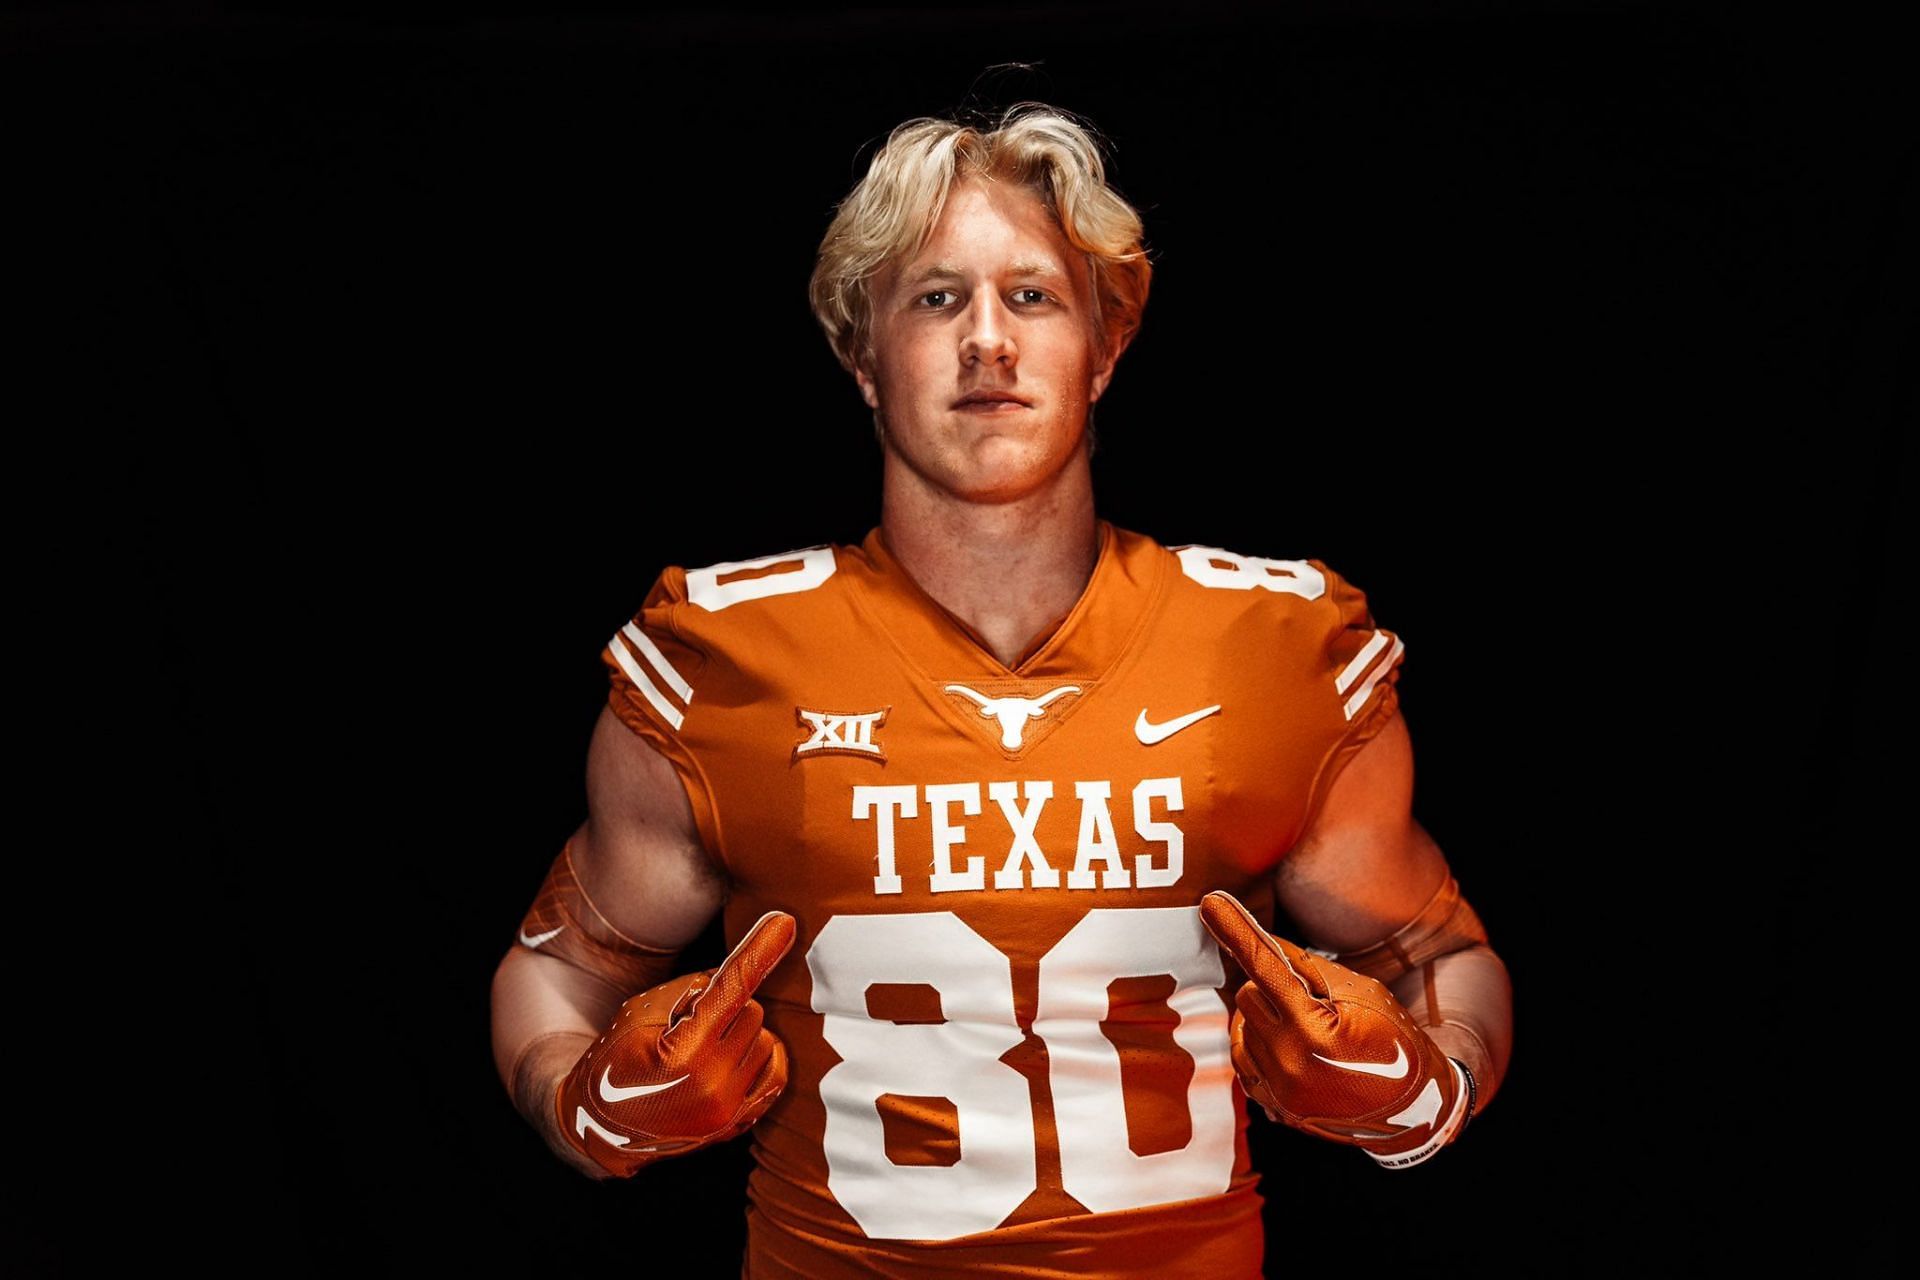 Ryner Swanson during his official visit to Texas